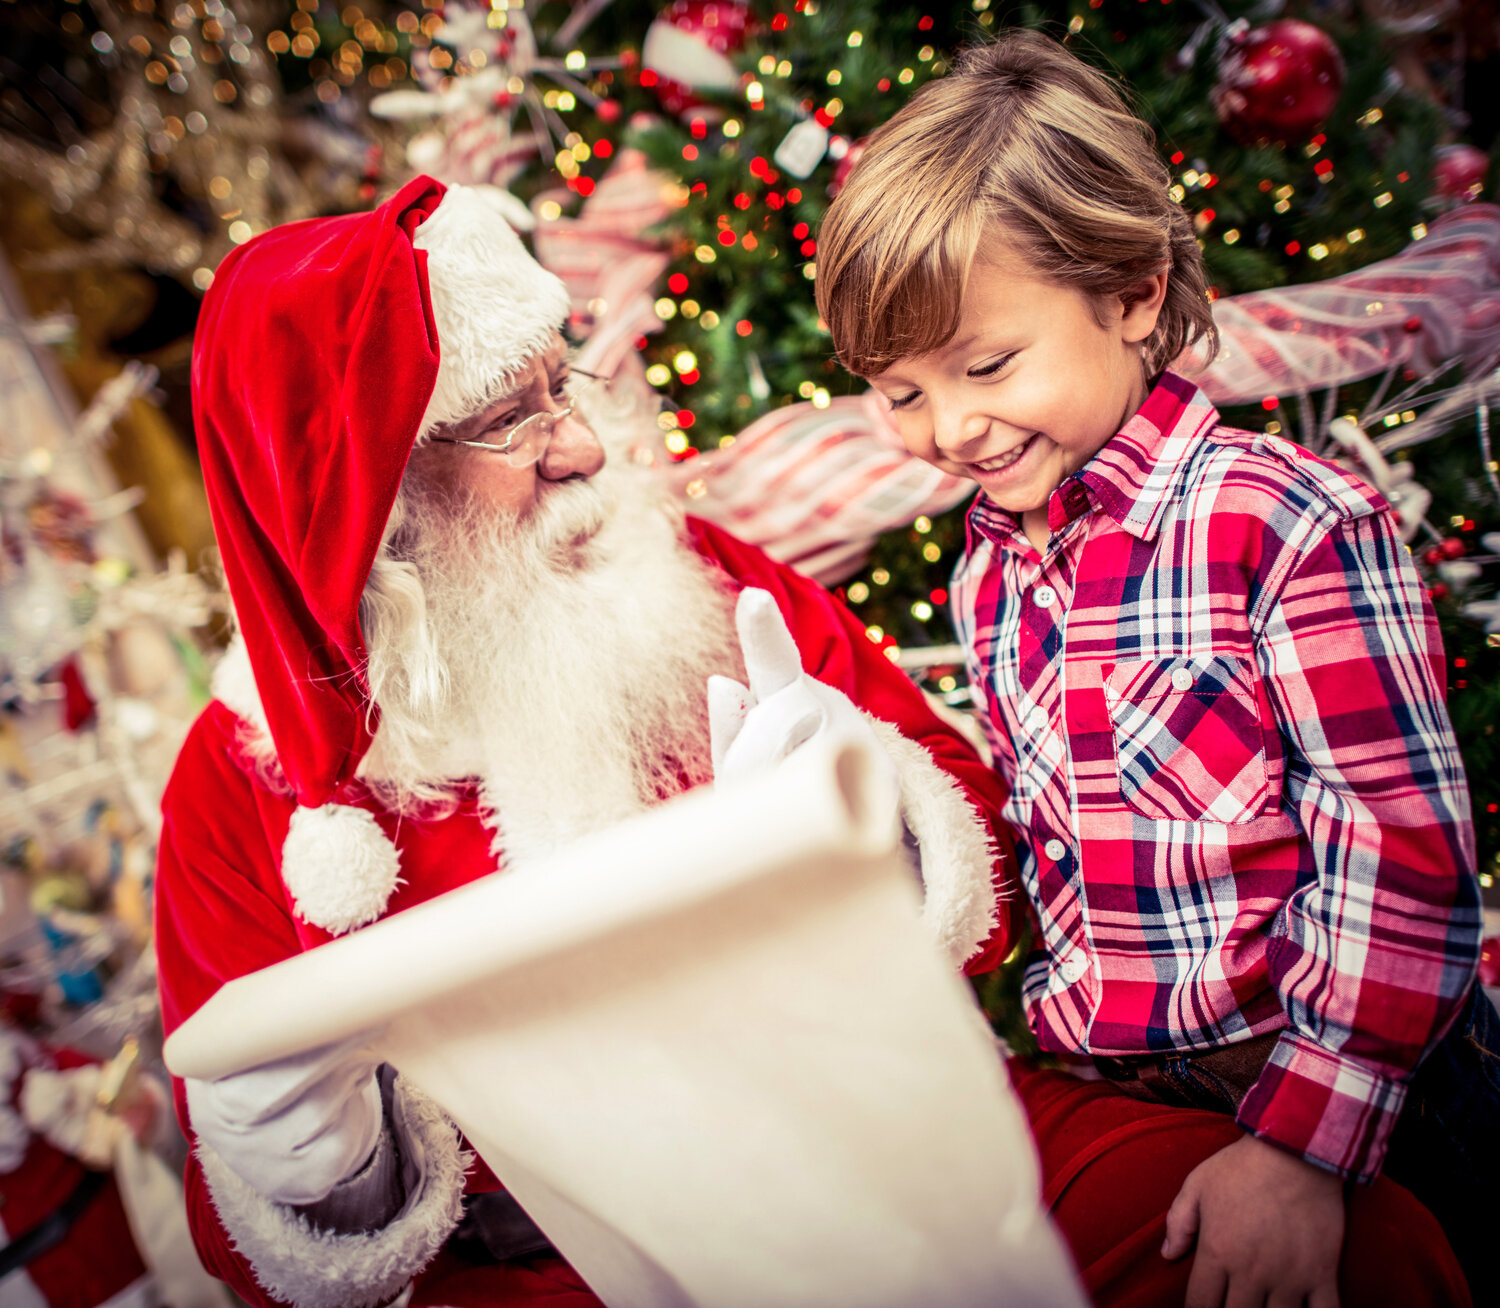 Get ready for a joyous and magical experience as the city of Surprise presents Cookies and Crafts with Santa.